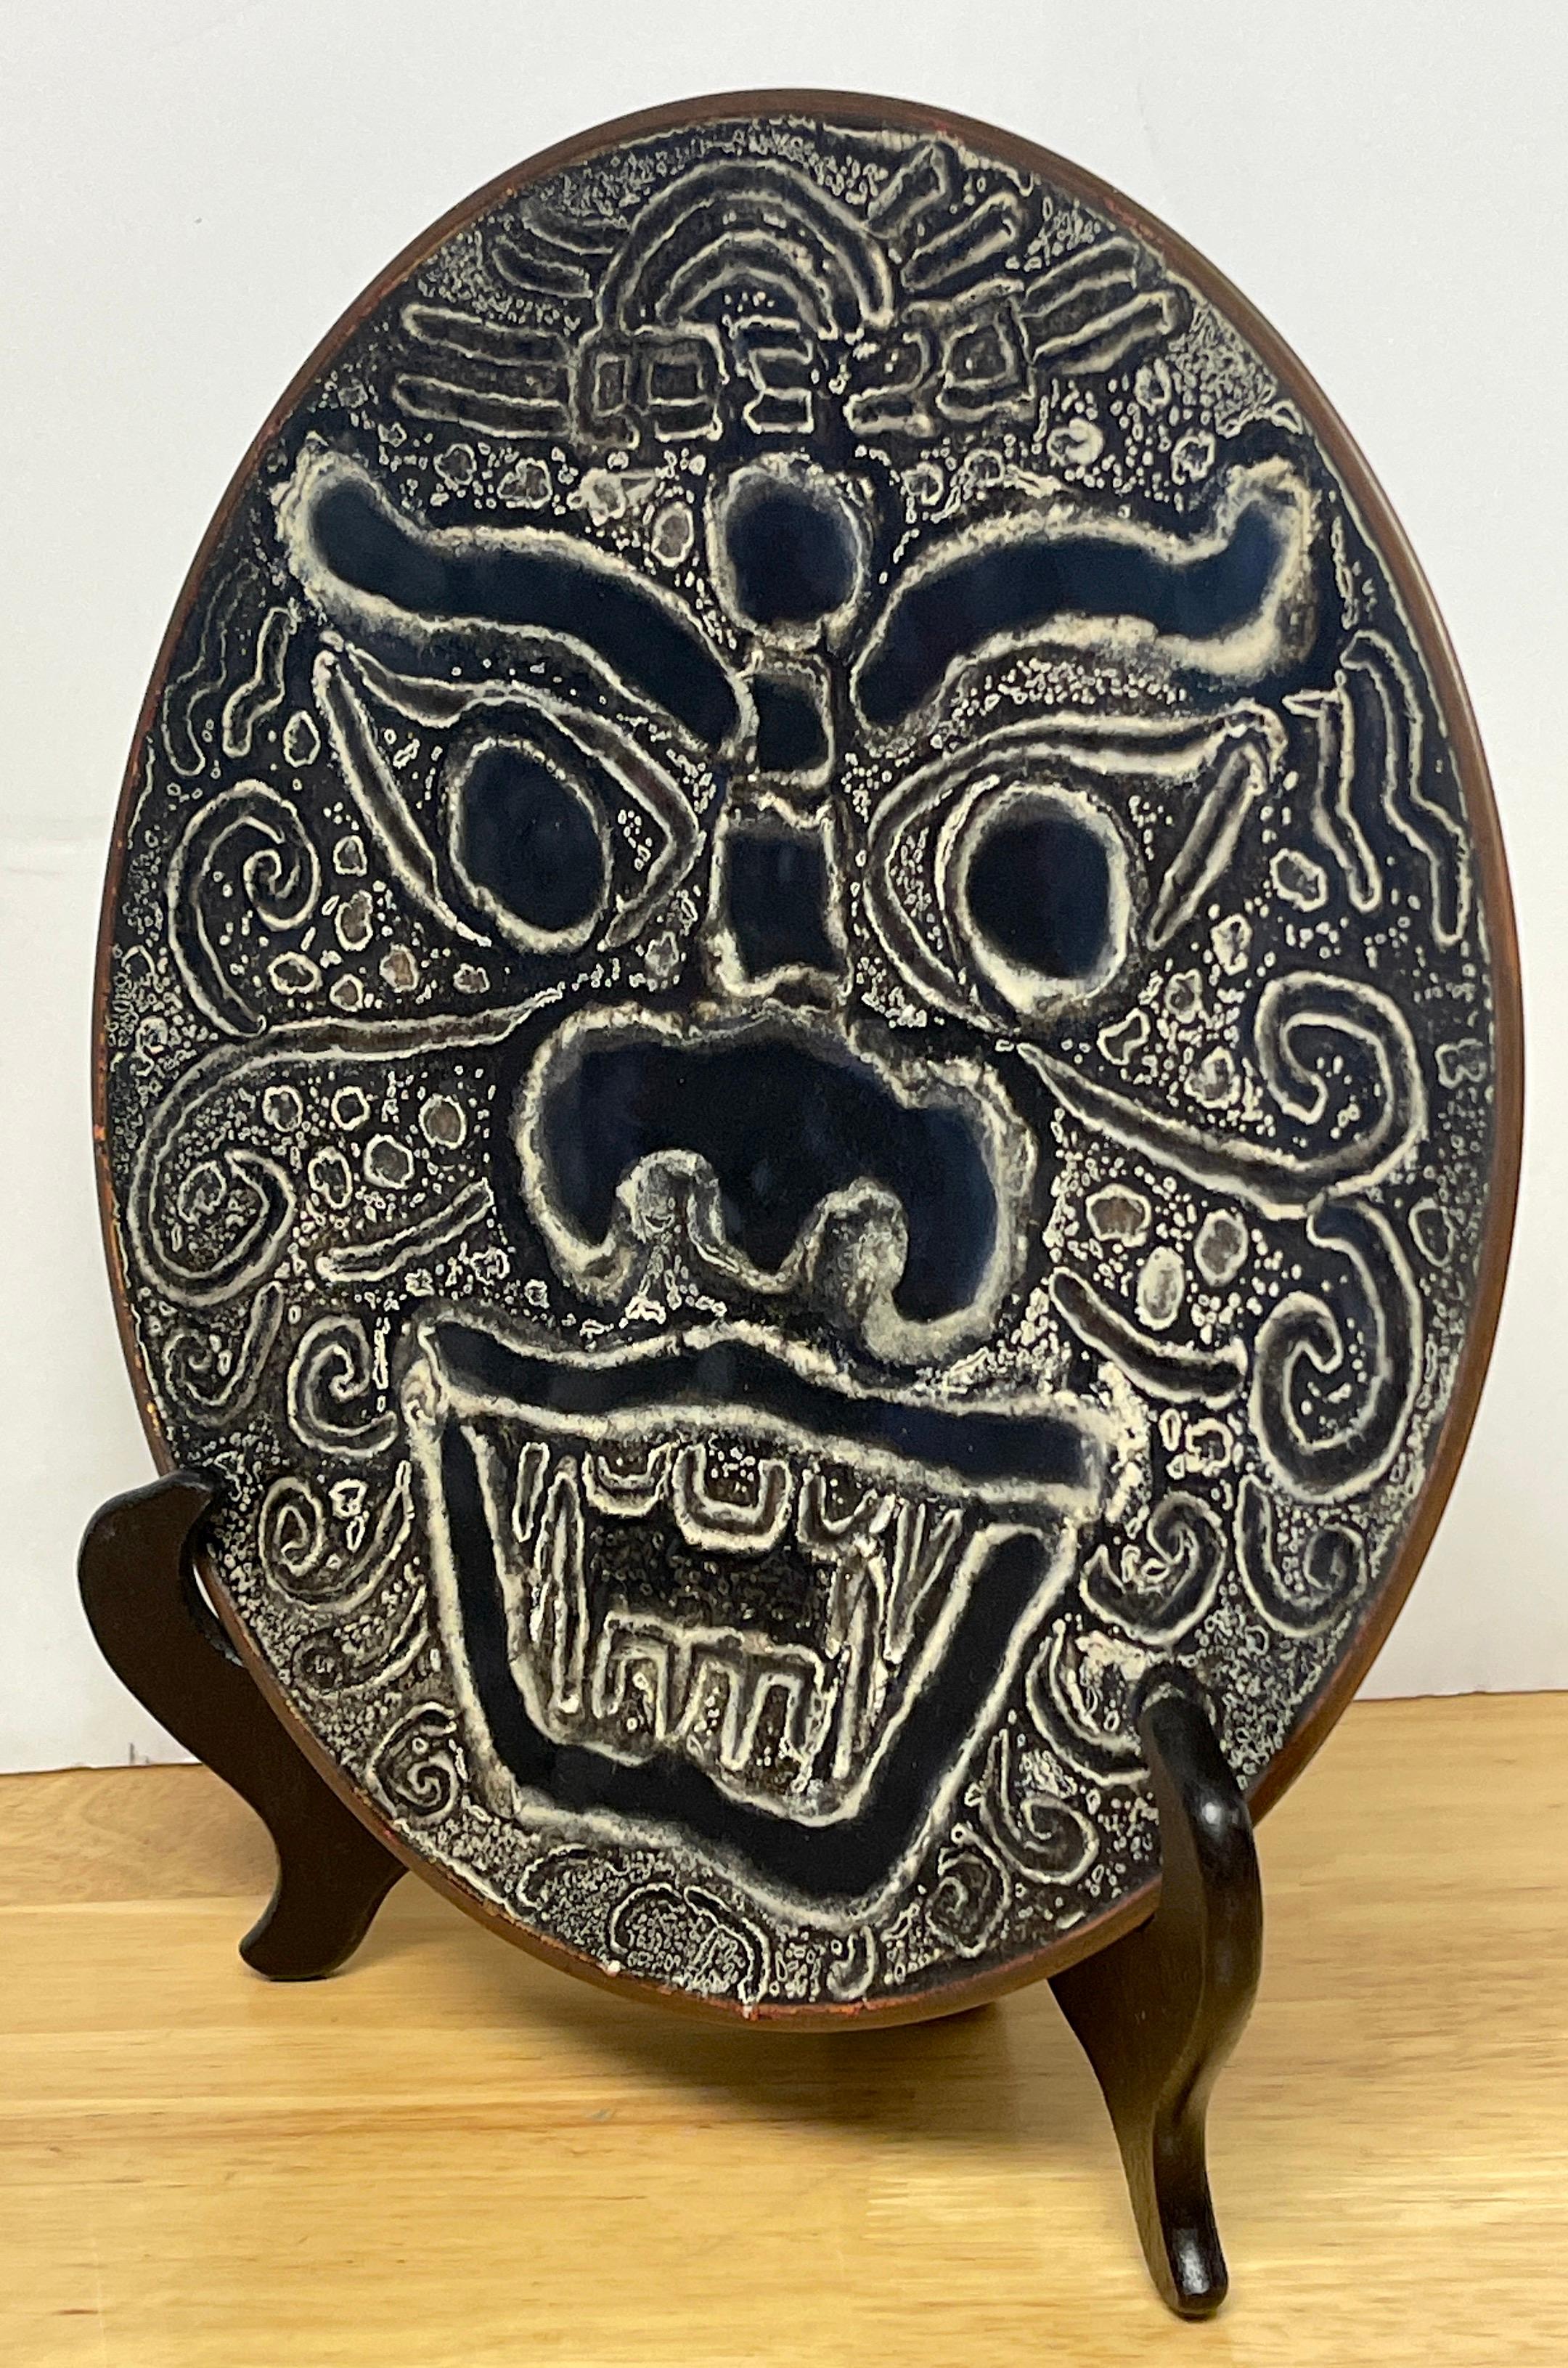 20th Century Modern Chinese Export Enamel Foo Dog Motif Charger with Stand  For Sale